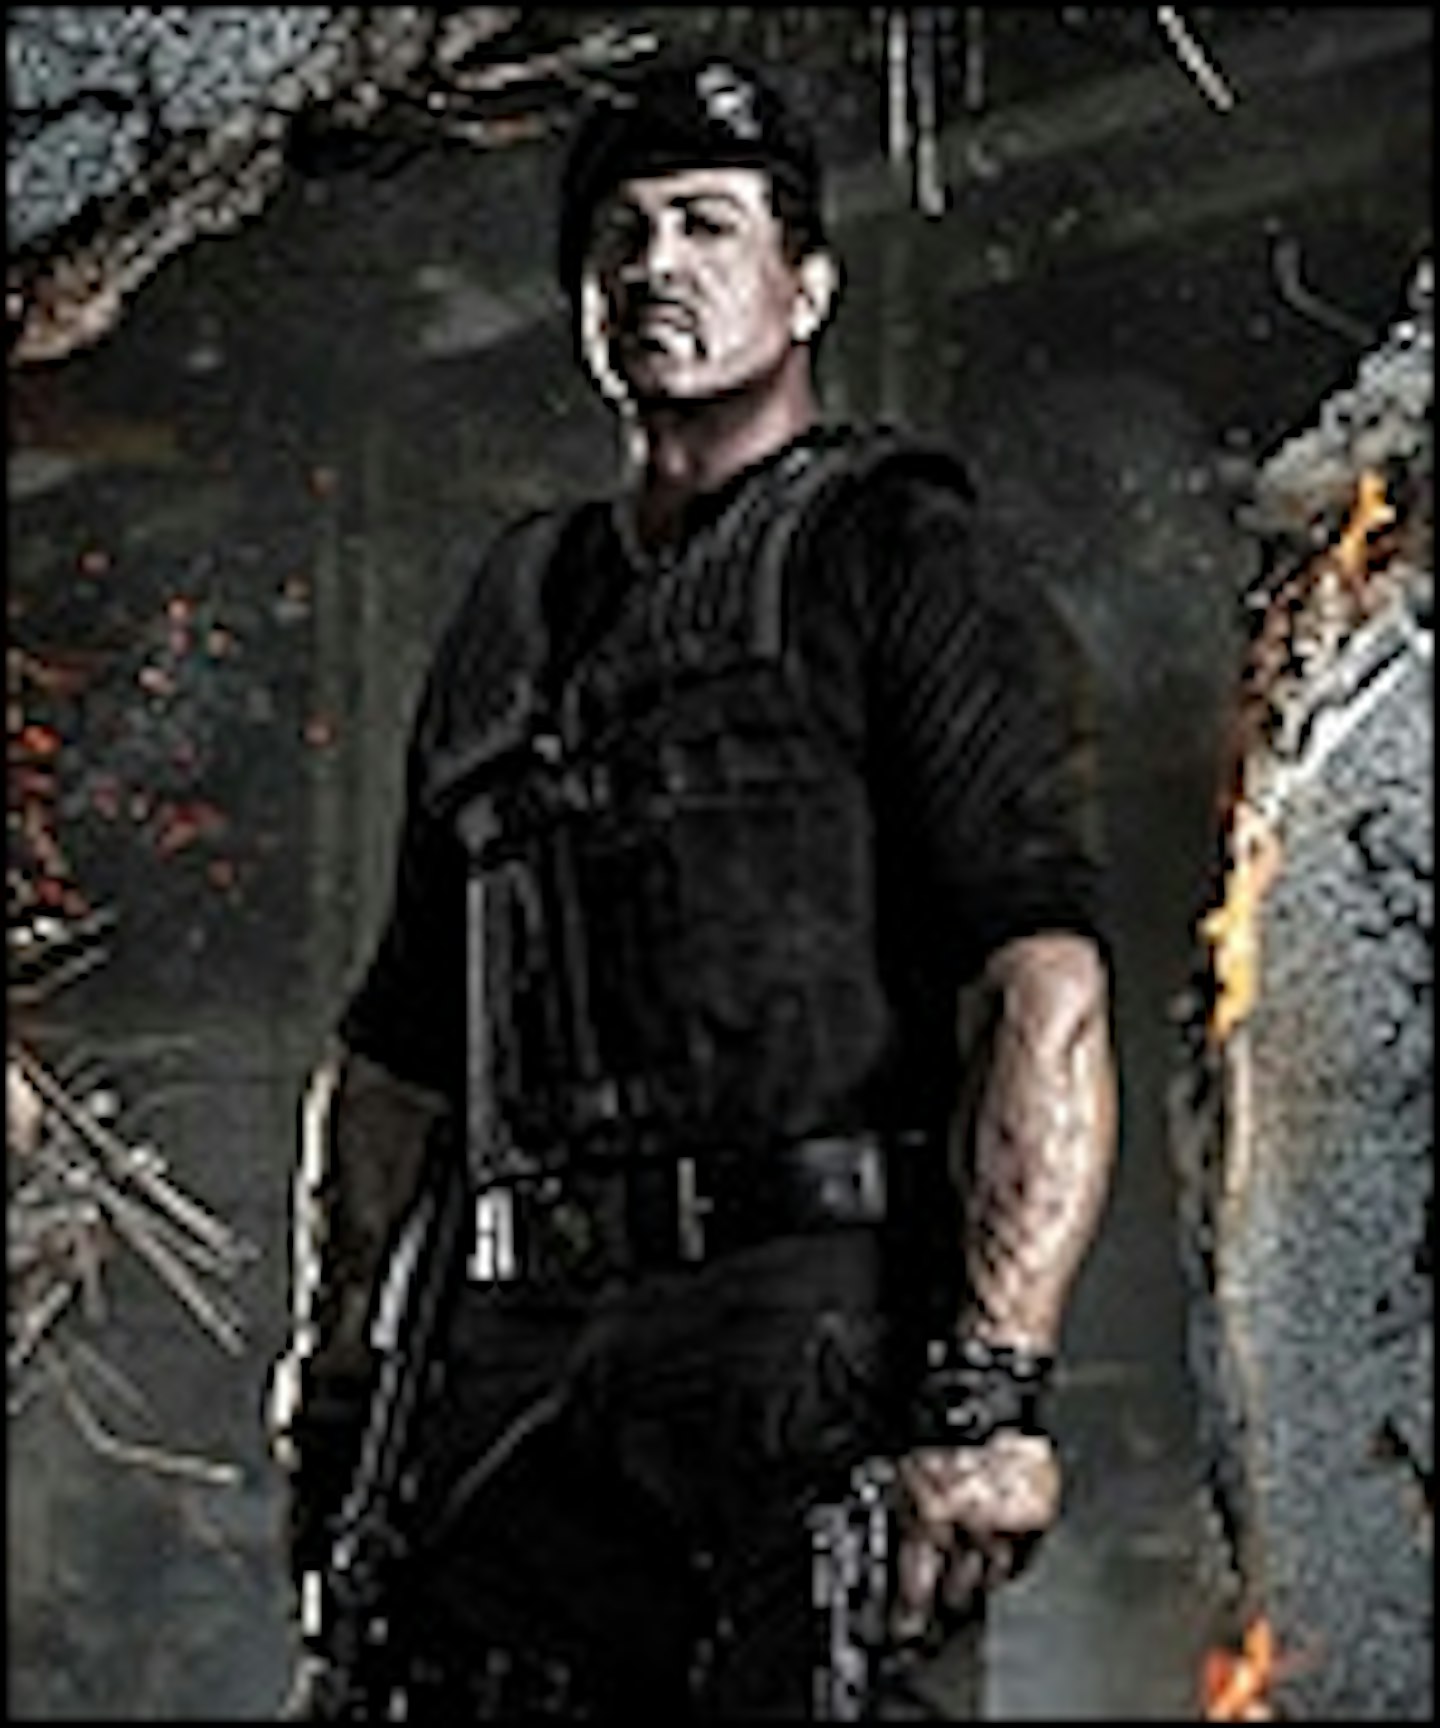 Official Expendables 2 Poster Arrives